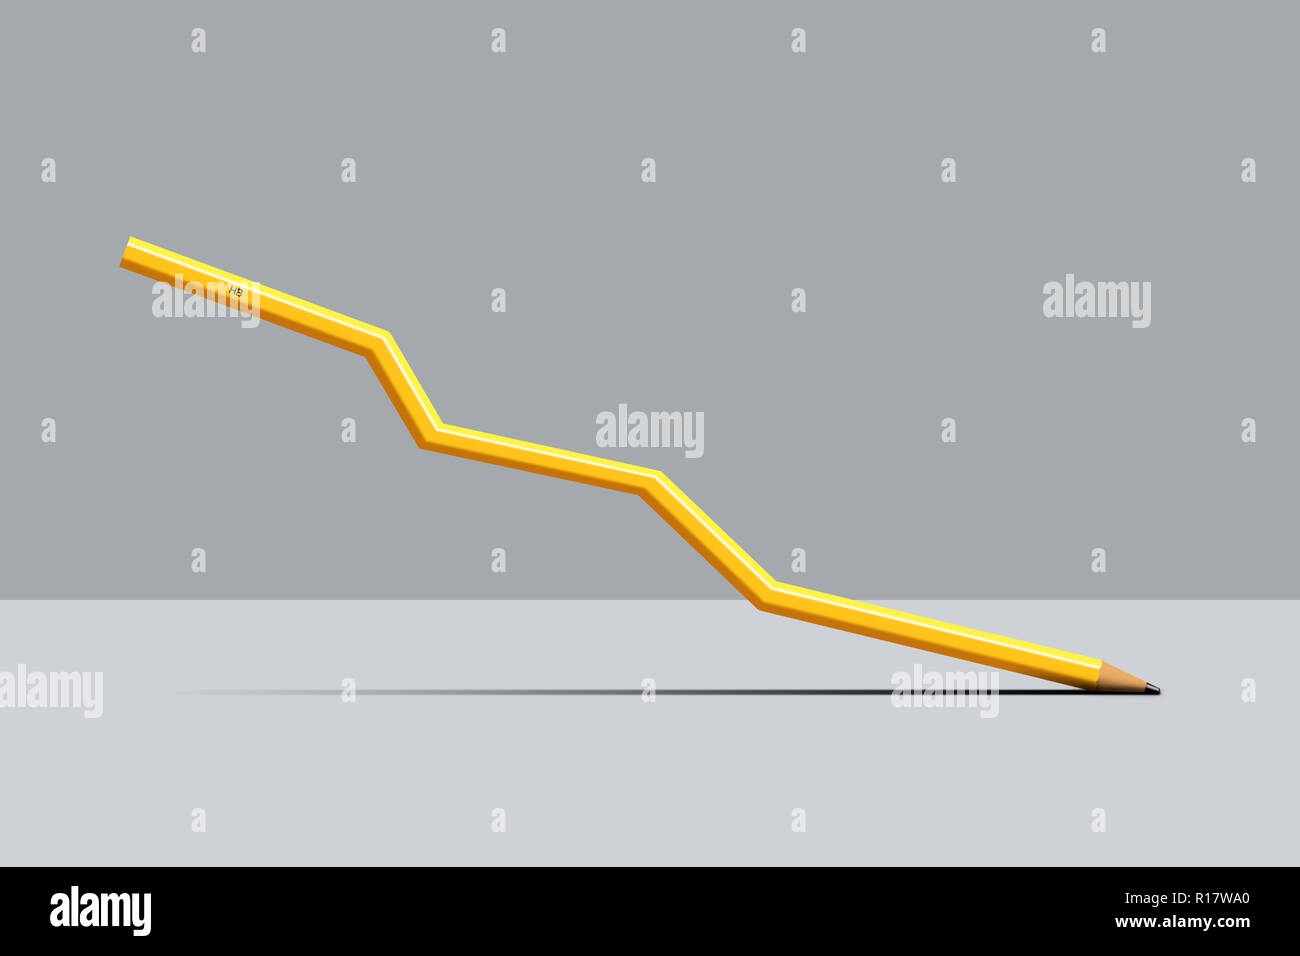 Yellow pencil in form of downward growth chart, grey background, digital image Stock Photo